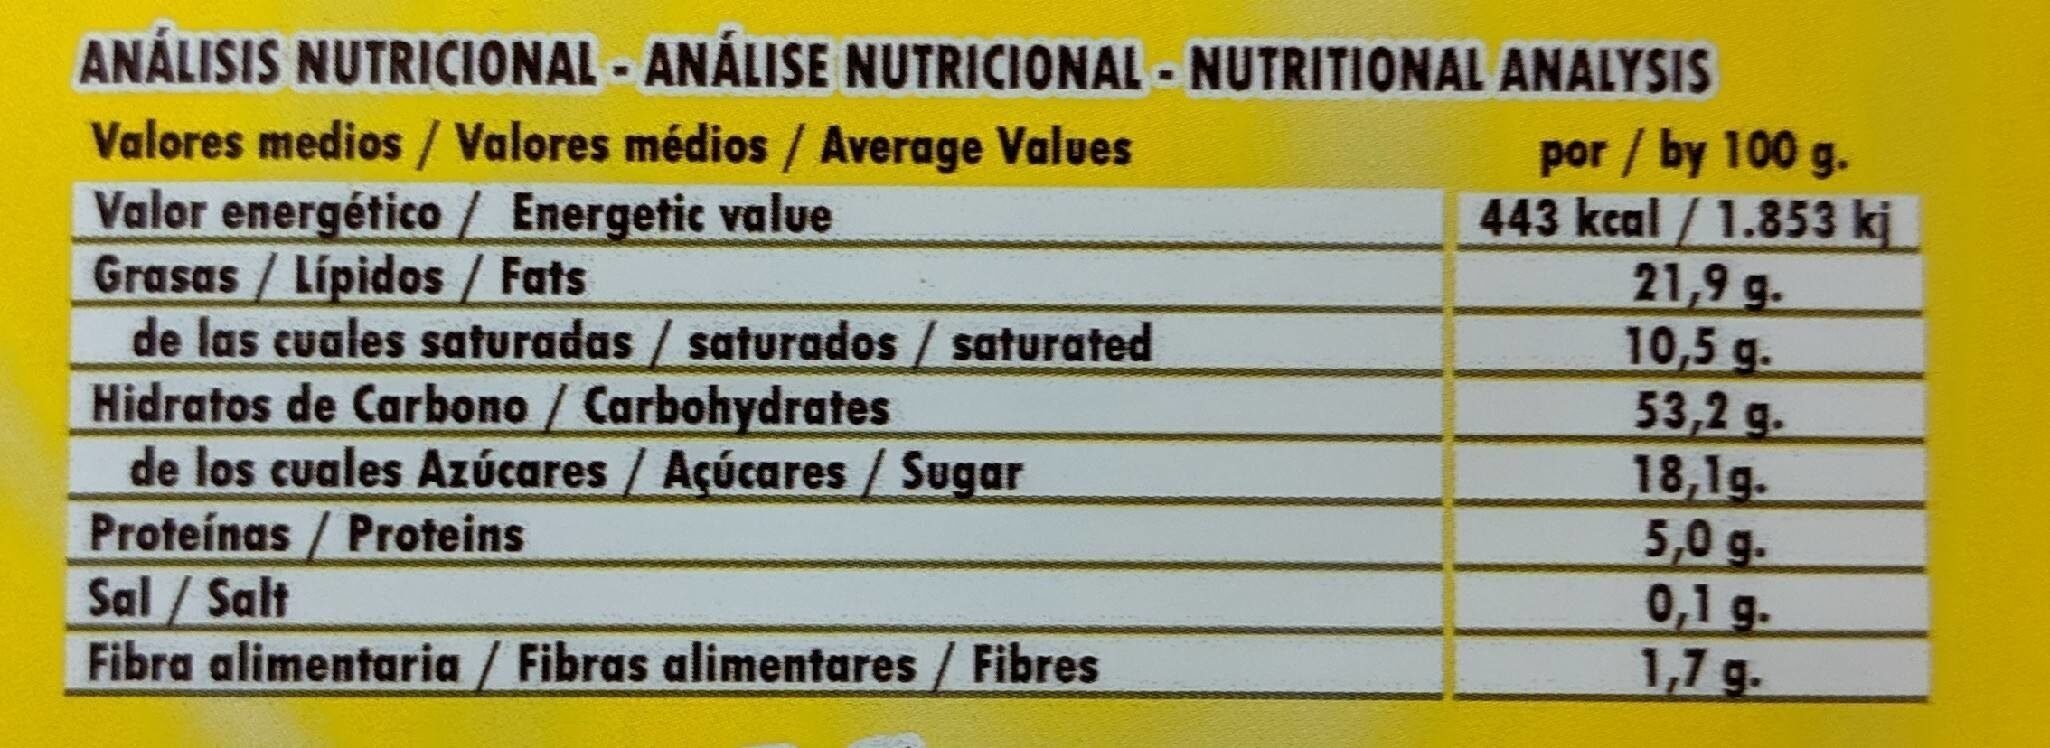 Biscuits Galicia, rosquillas. - Nutrition facts - es